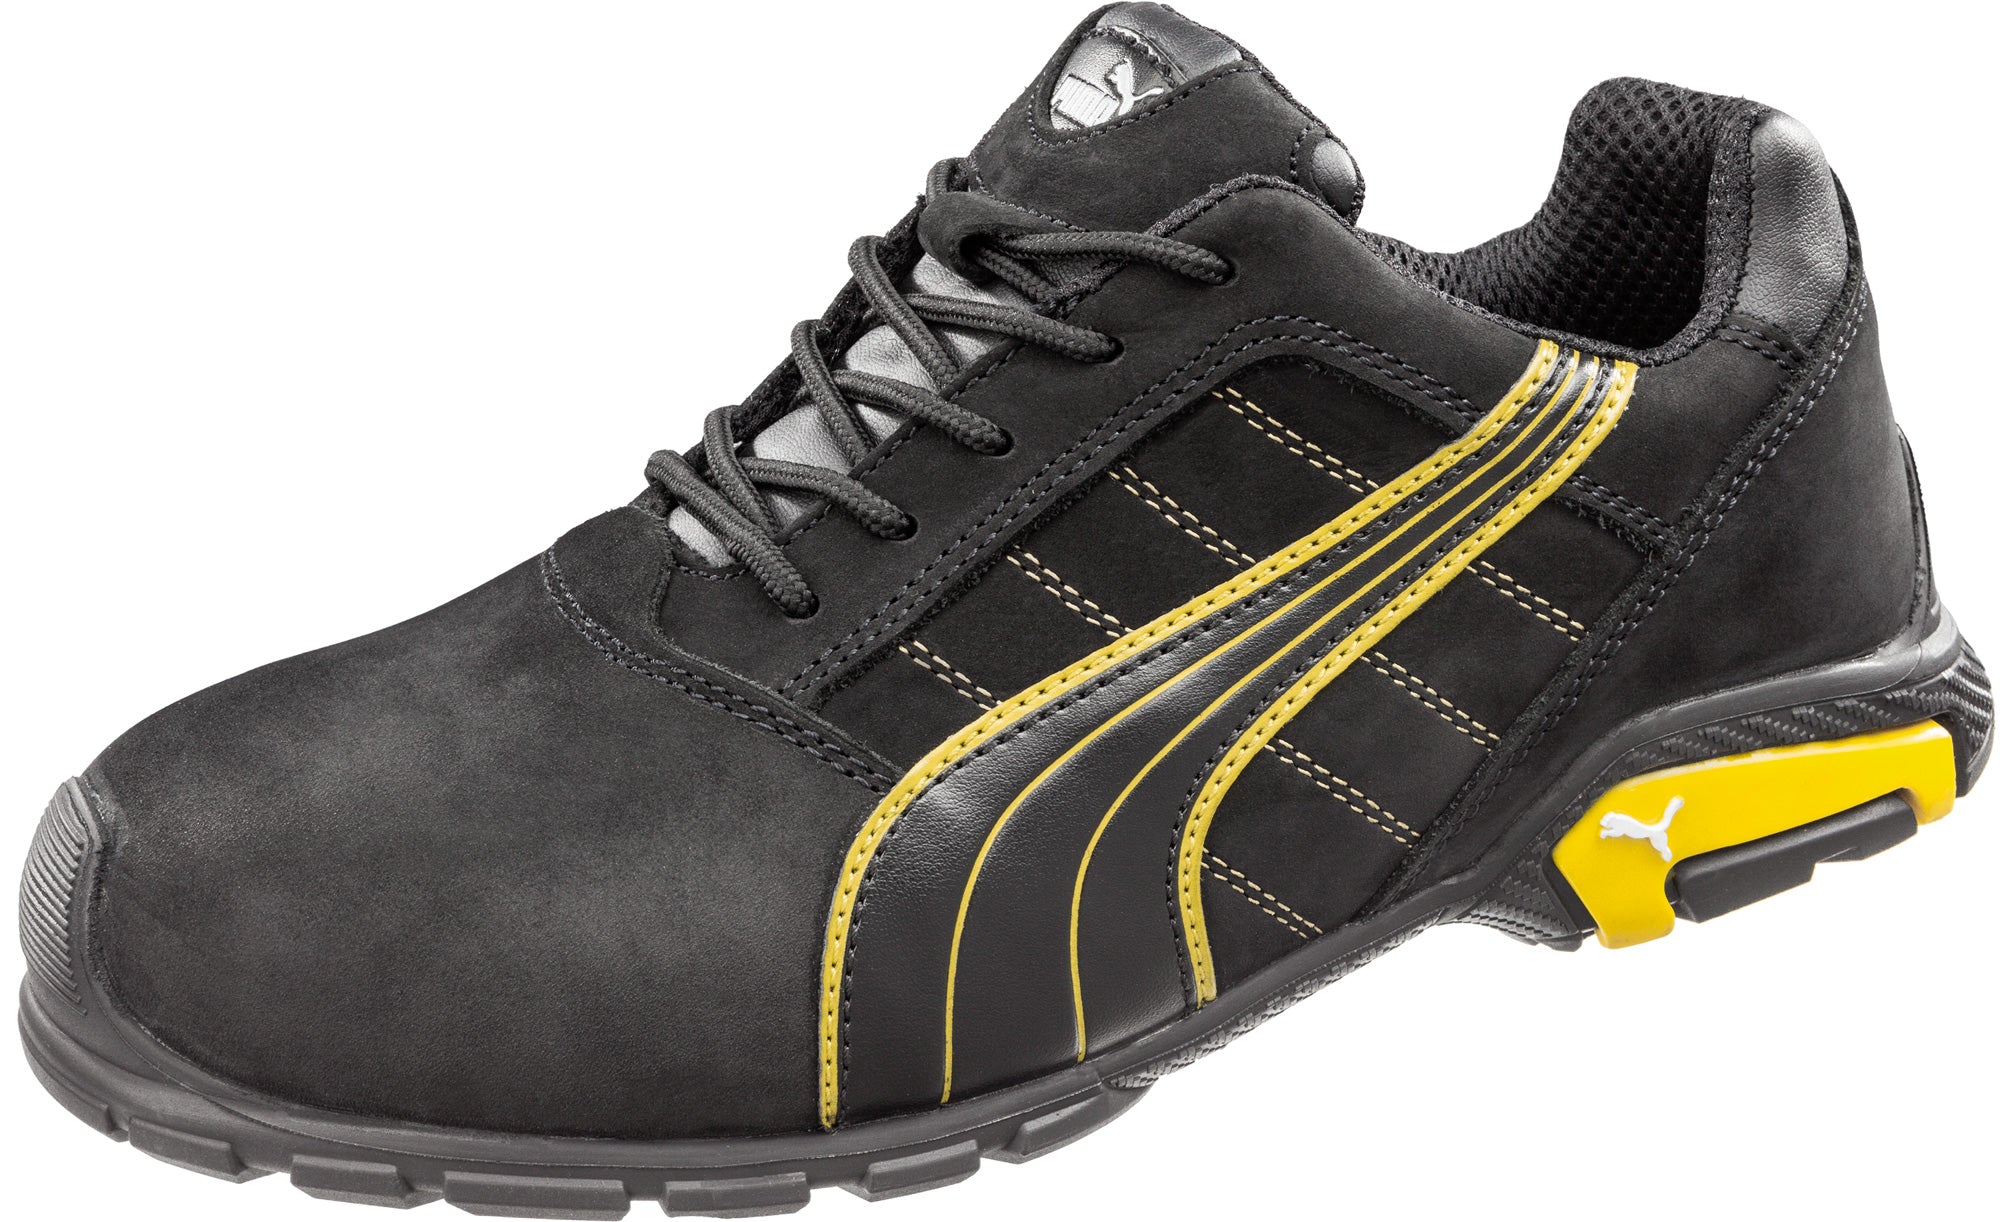 Western – Oxford Work Leather Safety Puma The Mens Black Company Amsterdam Shoes AT